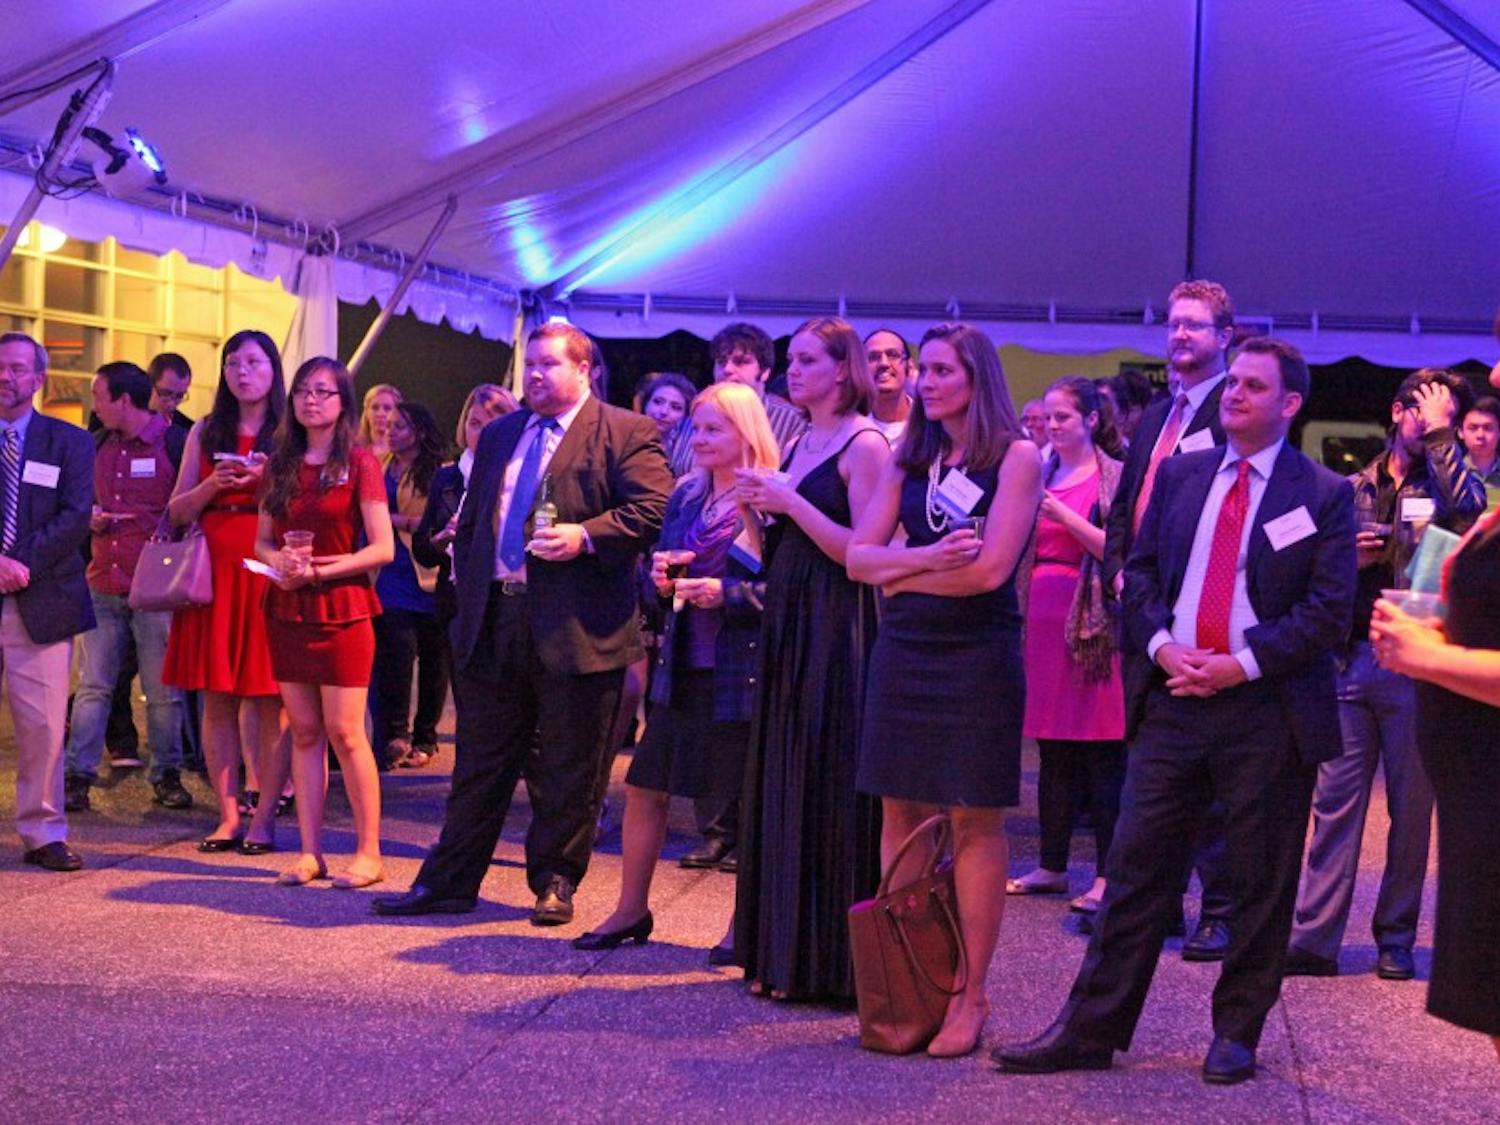 Alumni and students from the Graduate School attended a reception before the homecoming dance.